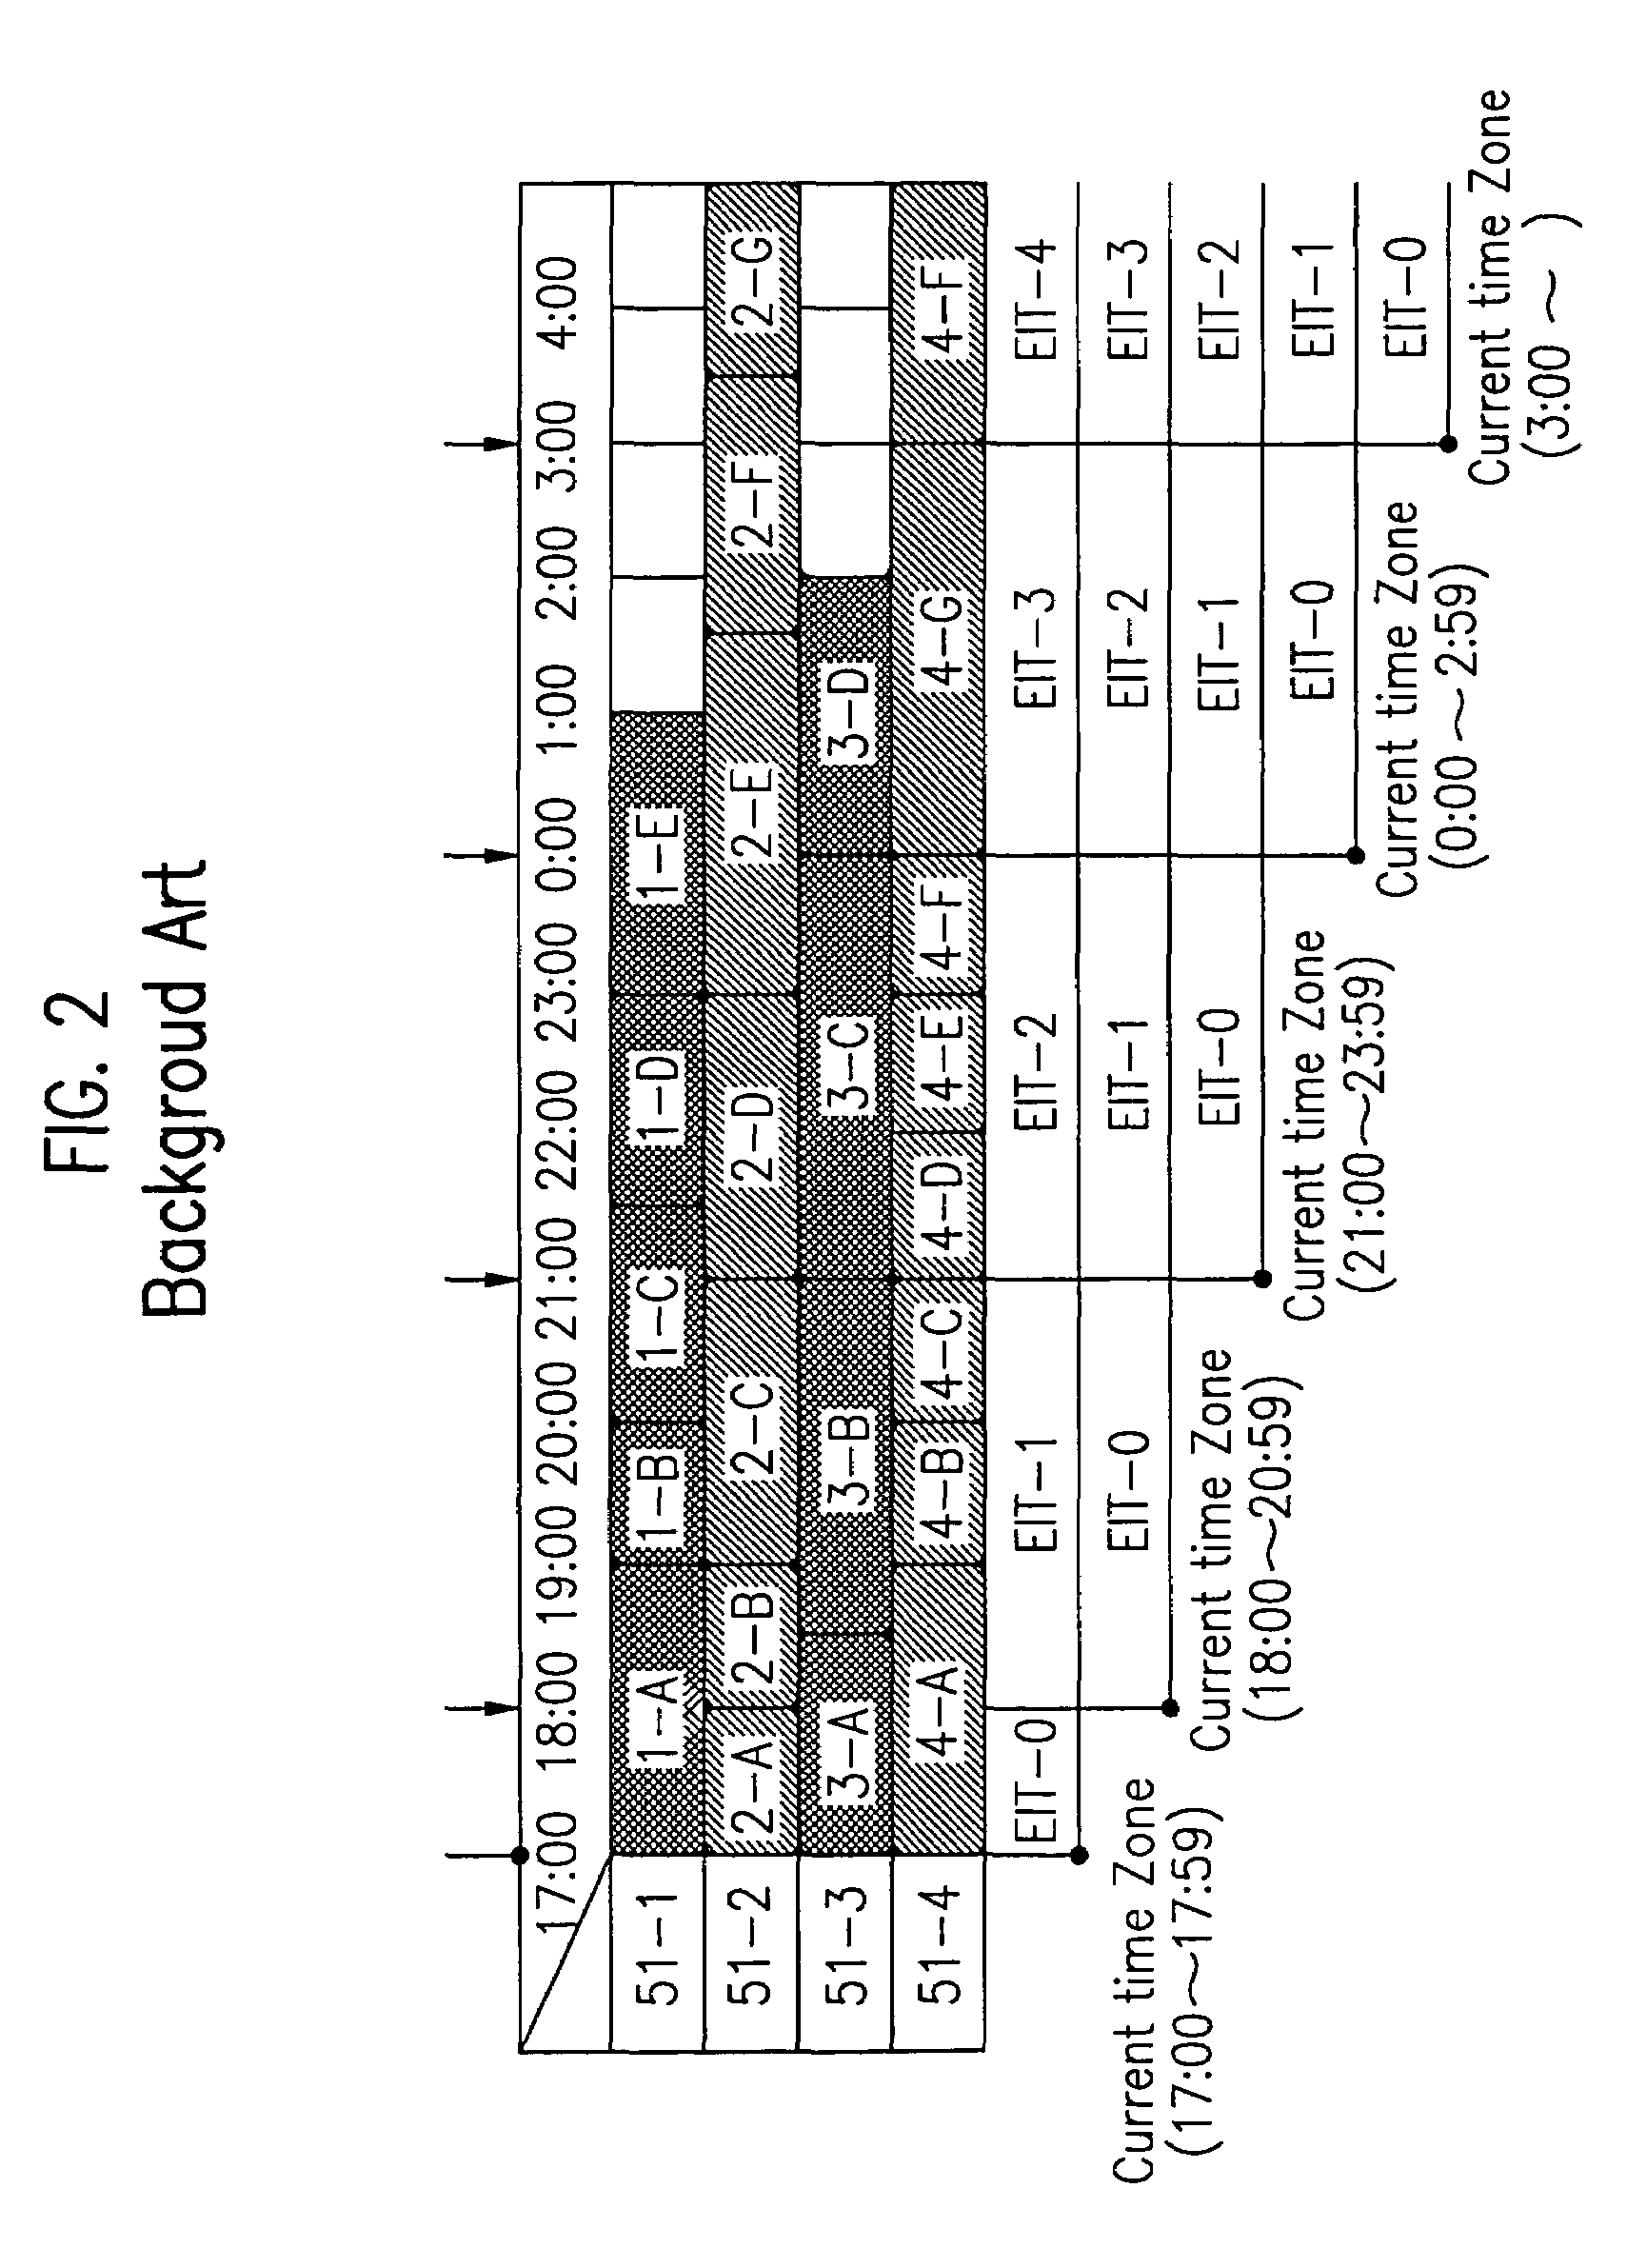 Master guide table for a digital broadcast protocol and method of broadcasting and receiving broadcast signals using the table